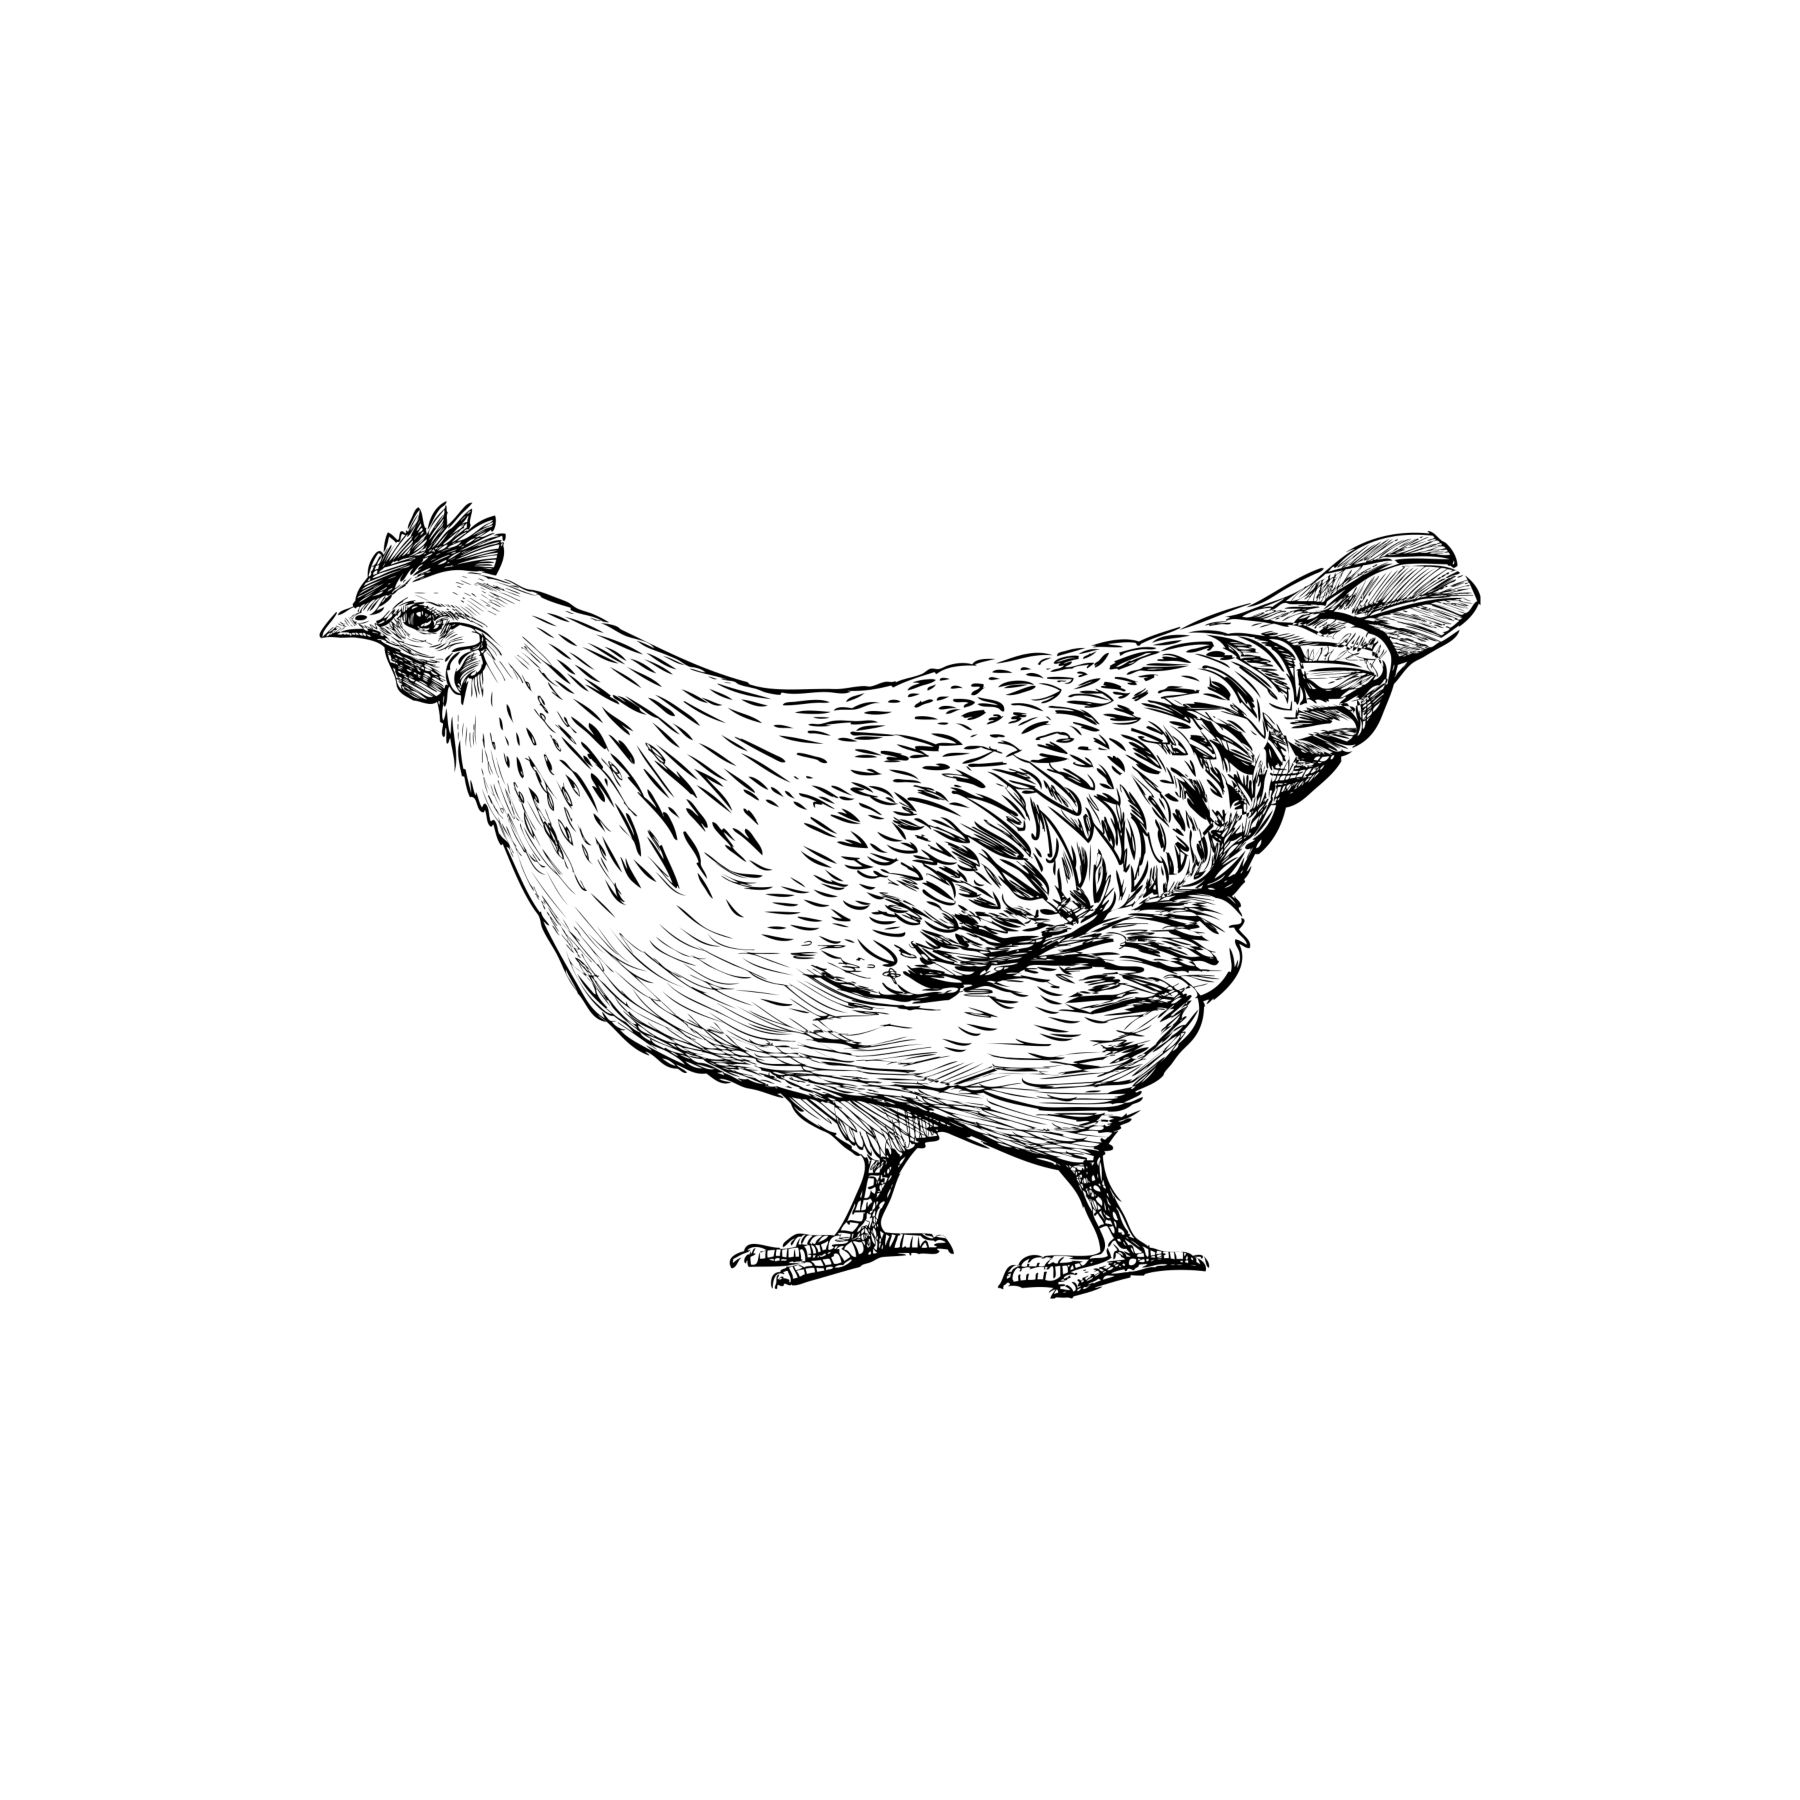 Poultry sketched